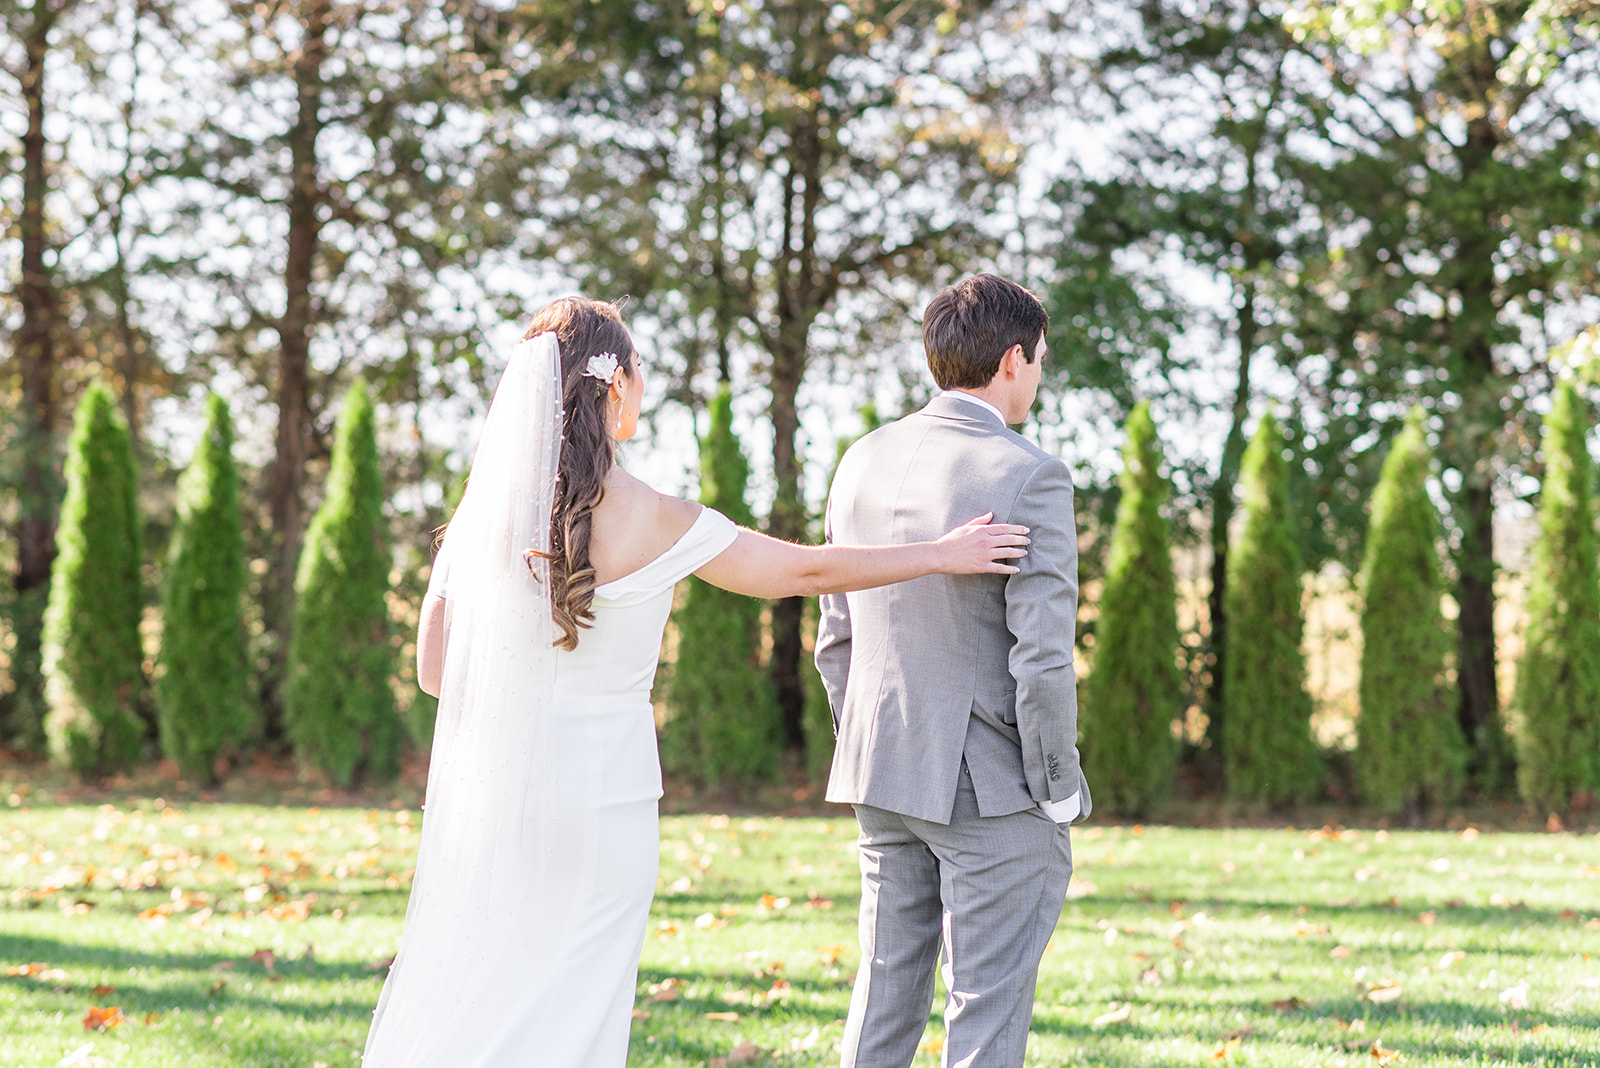 Wedding first look: Timeless Fall Wedding at The Barn at Sycamore Farms